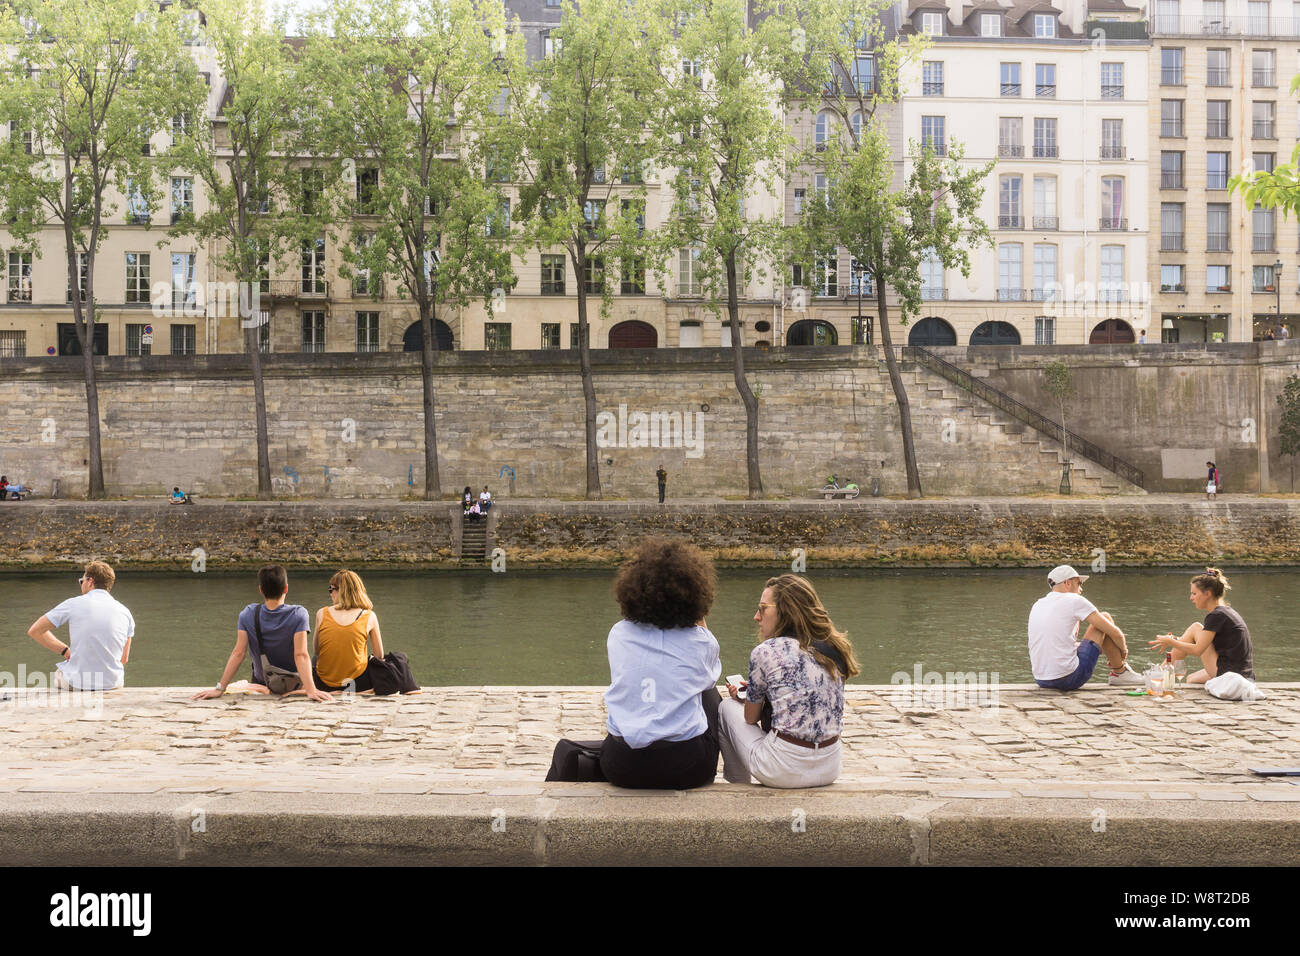 Paris river - People relaxing on the right embankment of the Seine River on a summer day in Paris, France, Europe. Stock Photo